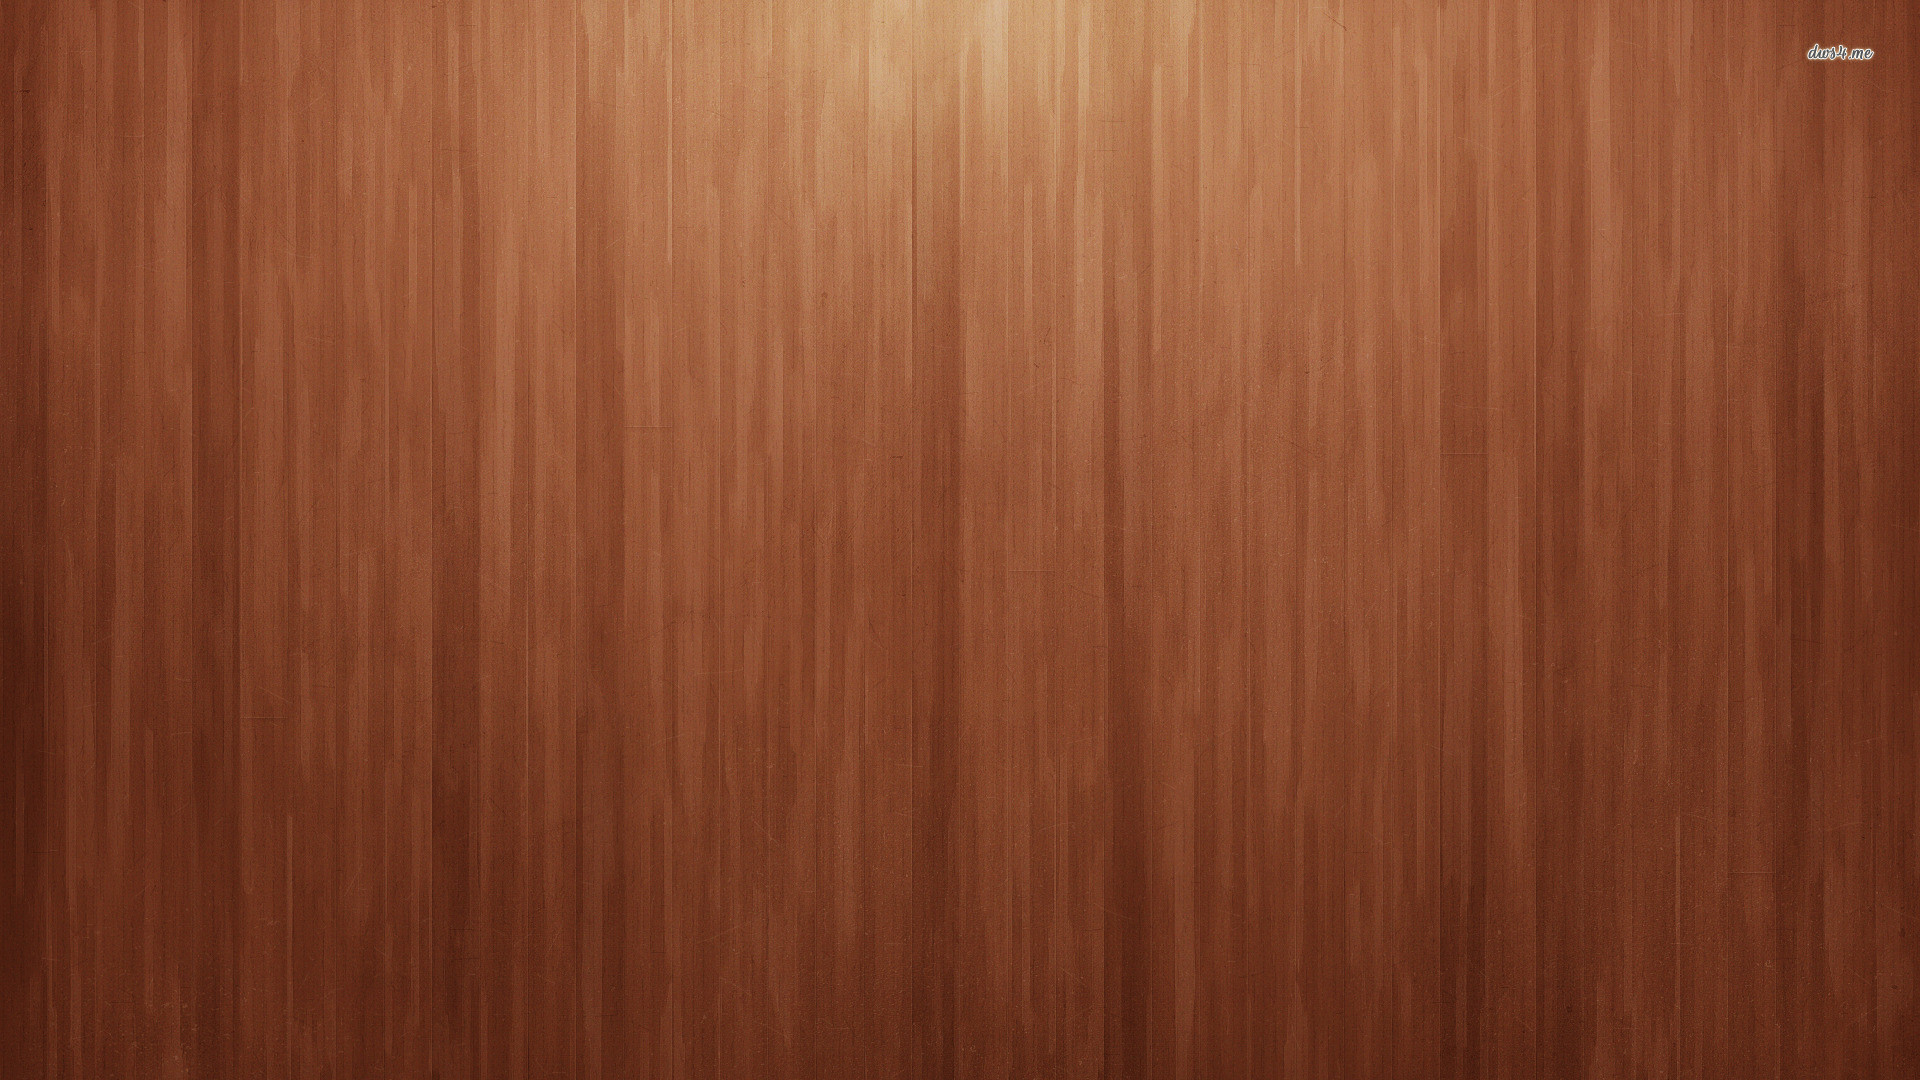 1920x1080 Wood wallpapers Chainimage 1920Ã1080